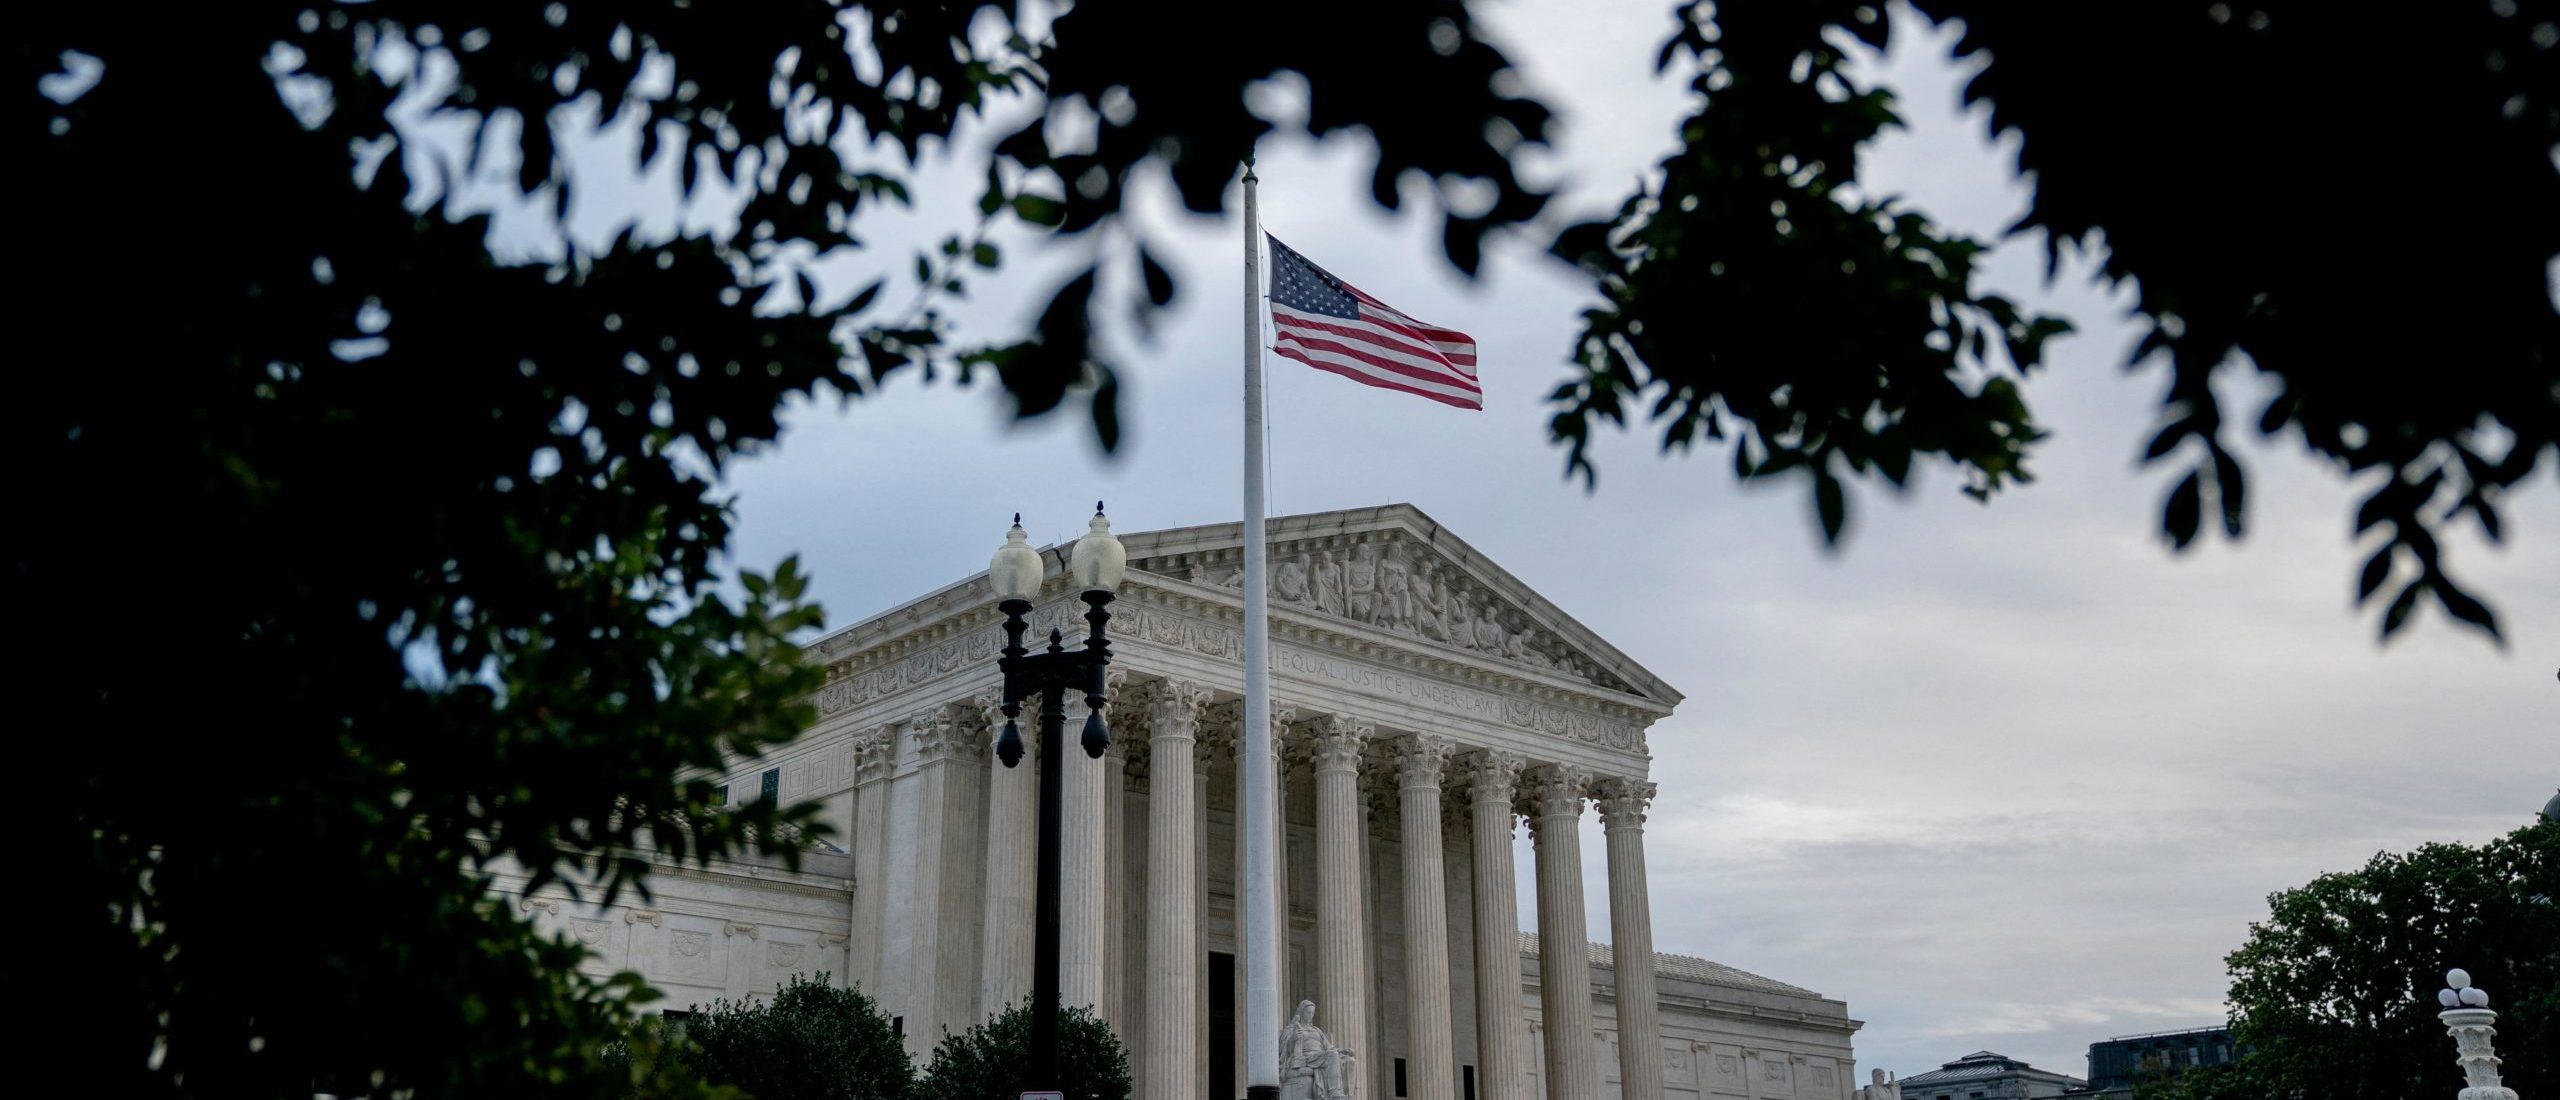 The US Supreme Court building stands in Washington, DC, on October 3, 2022. - The Supreme Court begins their new term today, and is expected to hear cases addressing a number of issues, including affirmative action, Alabamas congressional map, immigration, LGBTQ protections, and the authority of the Environmental Protection Agency. (Photo by Stefani Reynolds / AFP) (Photo by STEFANI REYNOLDS/AFP via Getty Images)